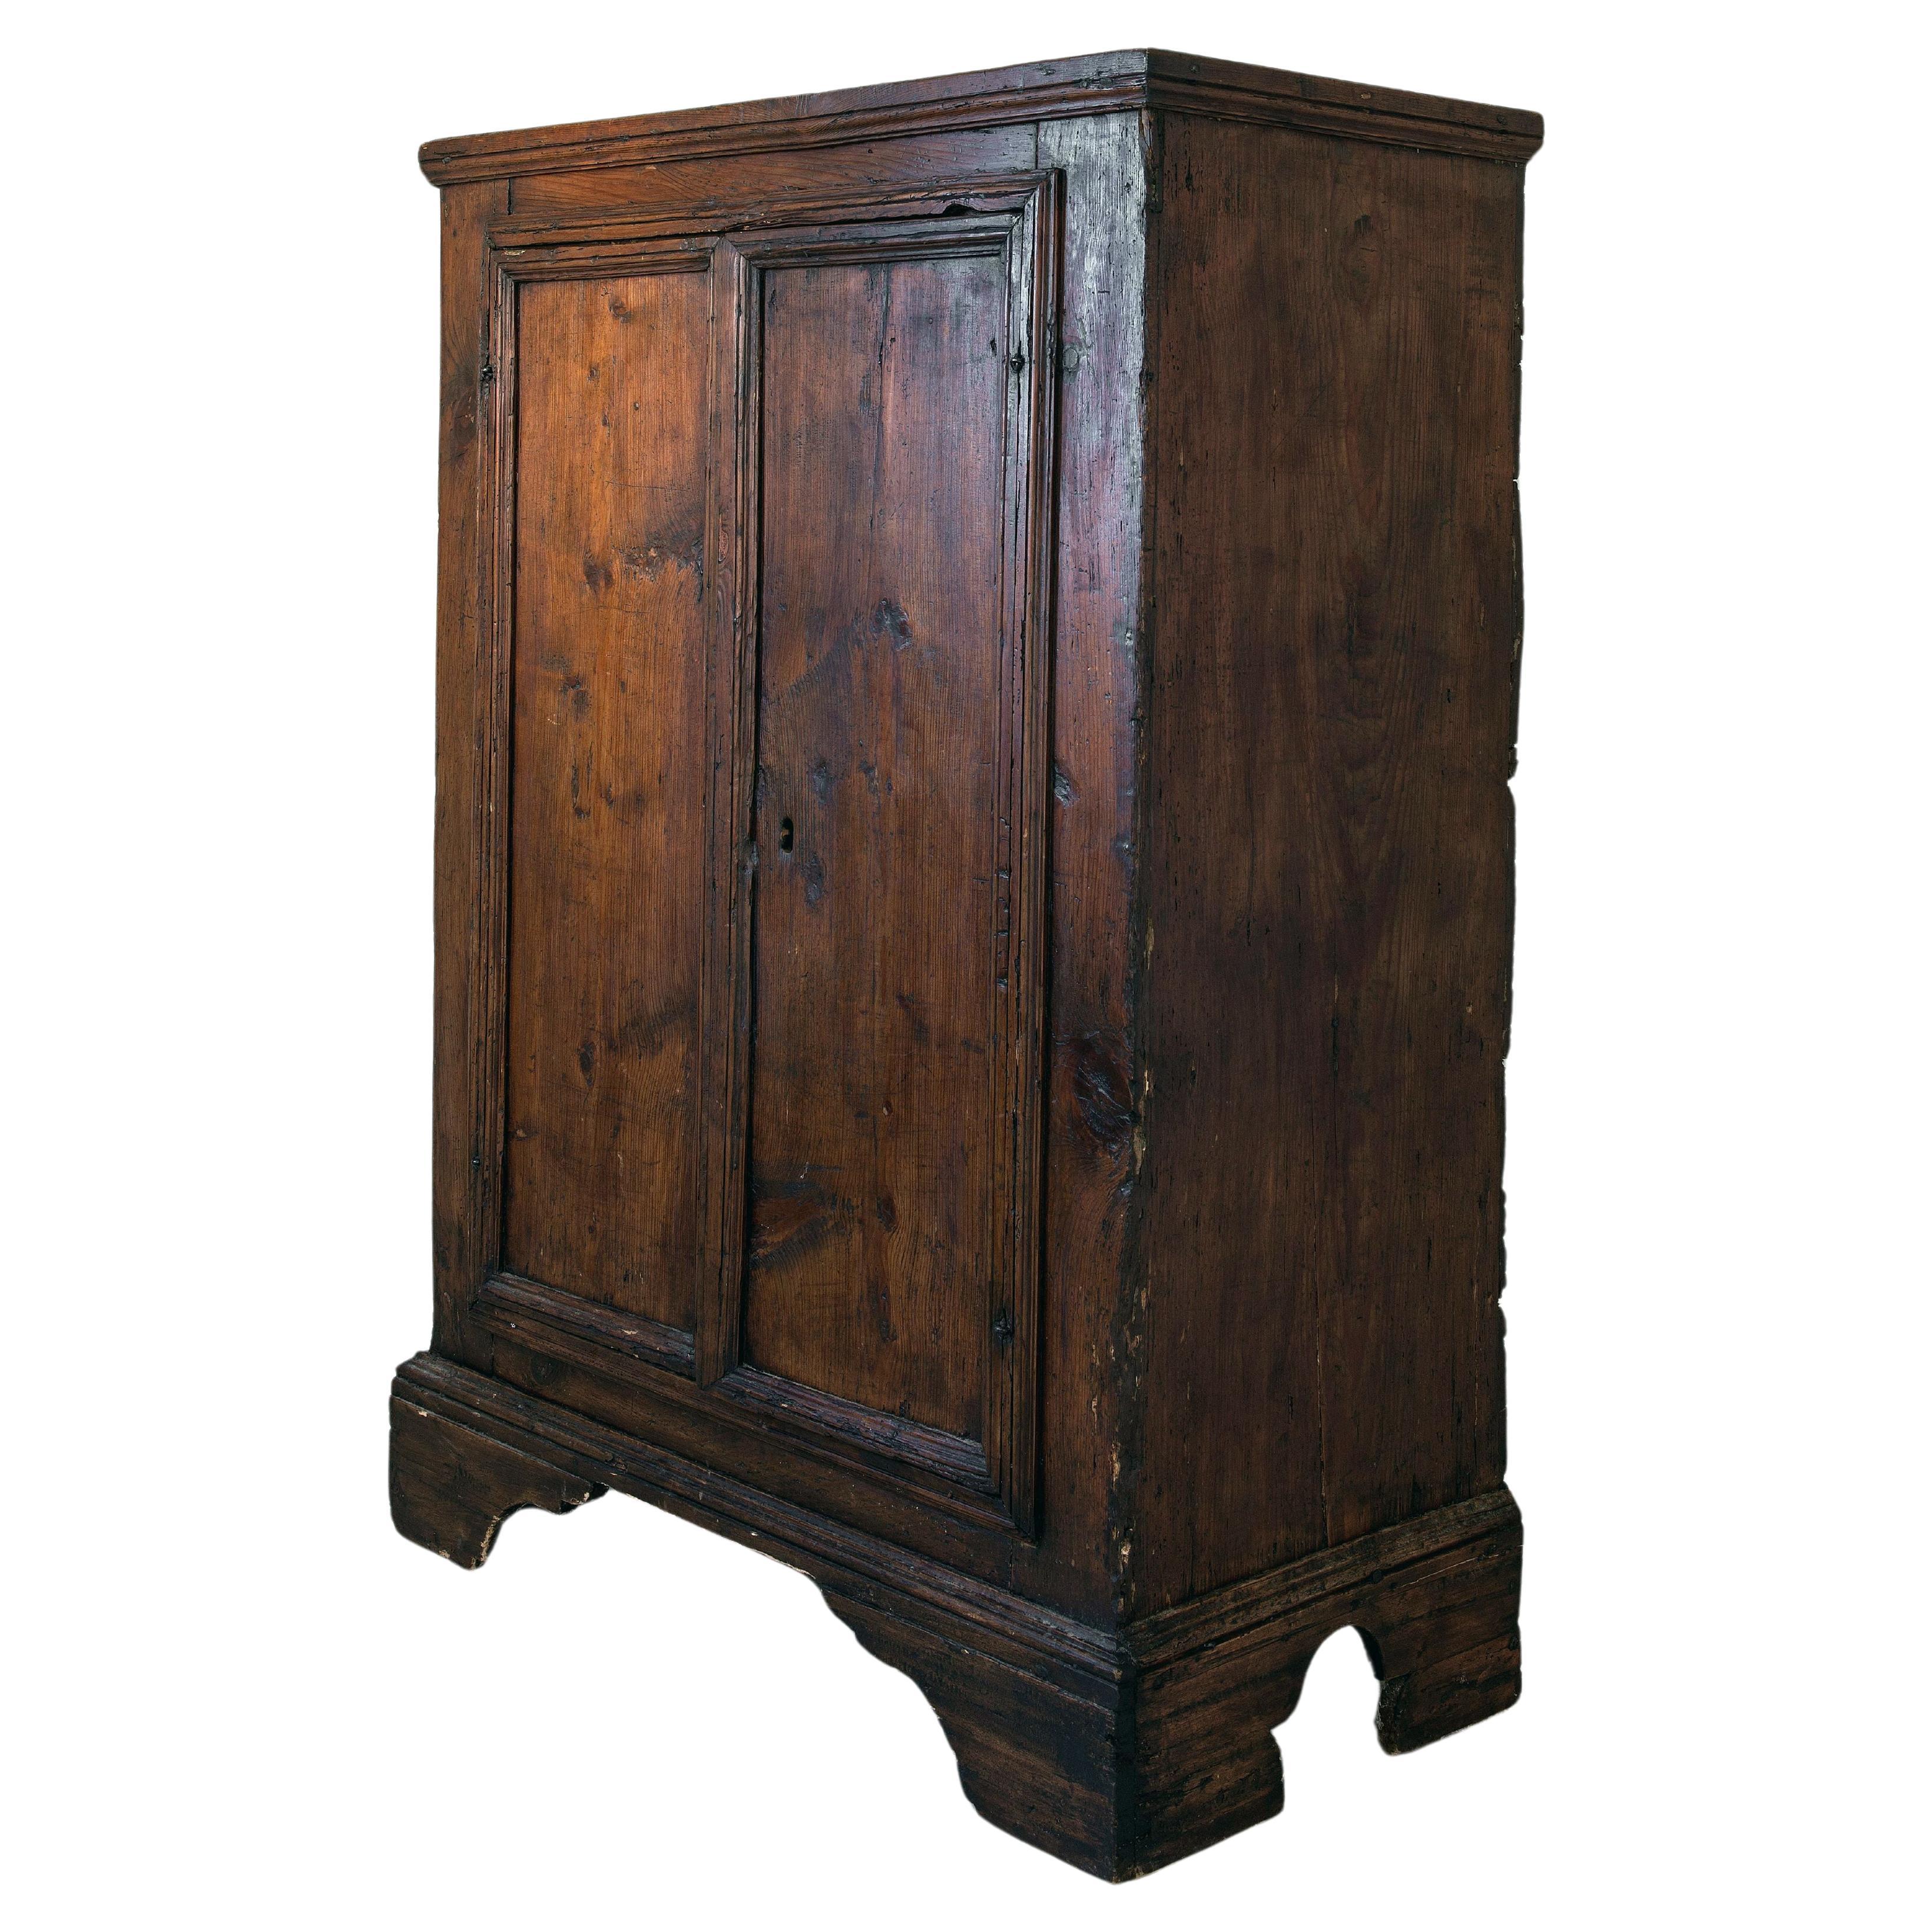 An exceptional late 17th, early 18th century cabinet in a beautifully patinated chestnut, old, possibly original forged lock.  Very good condition.

This sculptural piece would work in most settings because of its unusual proportions- It can be used